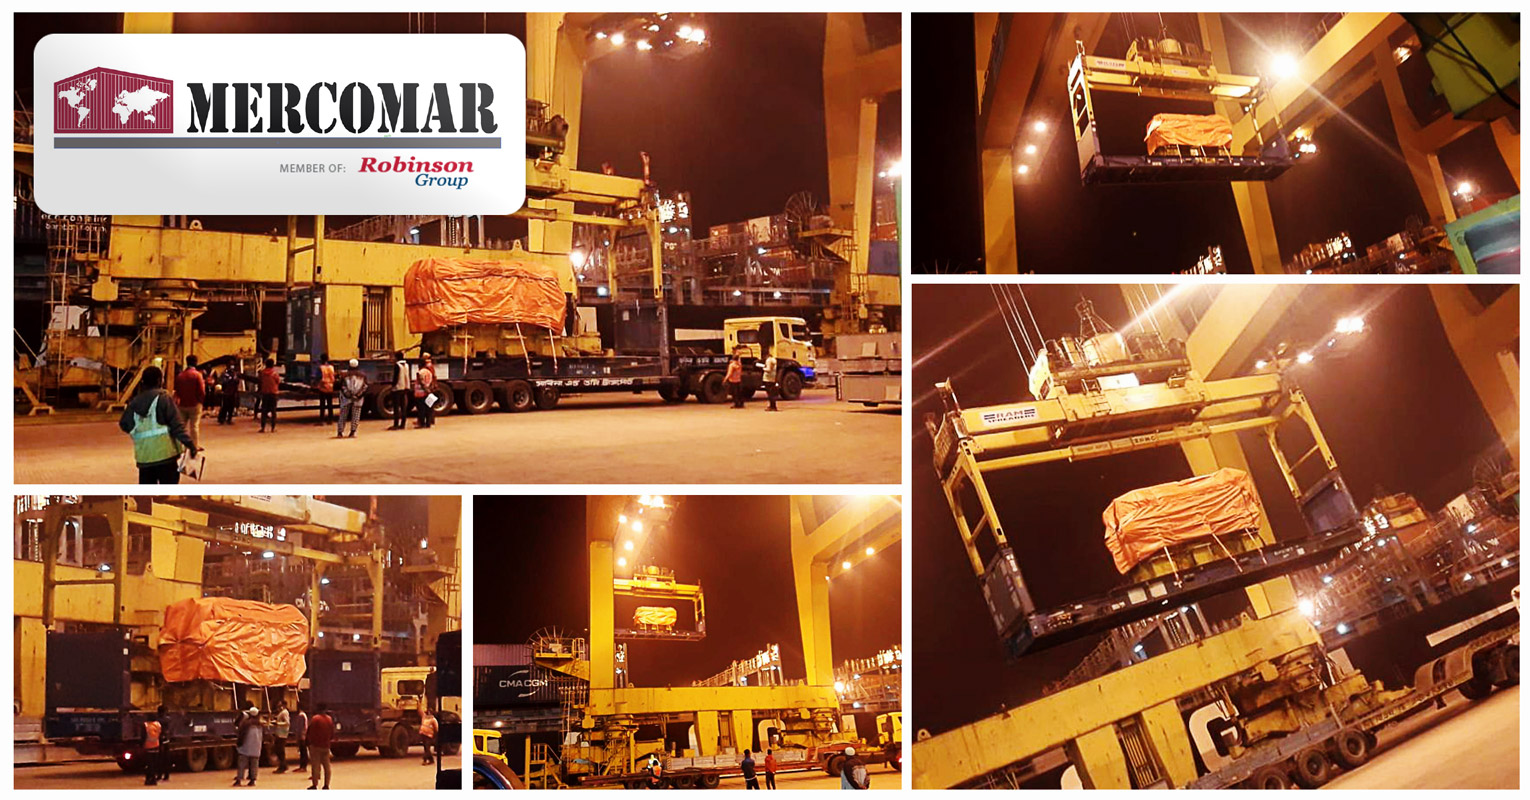 Mercomar Transported a Caterpillar Engine 3616 along with Spare Parts from Bangladesh to Argentina